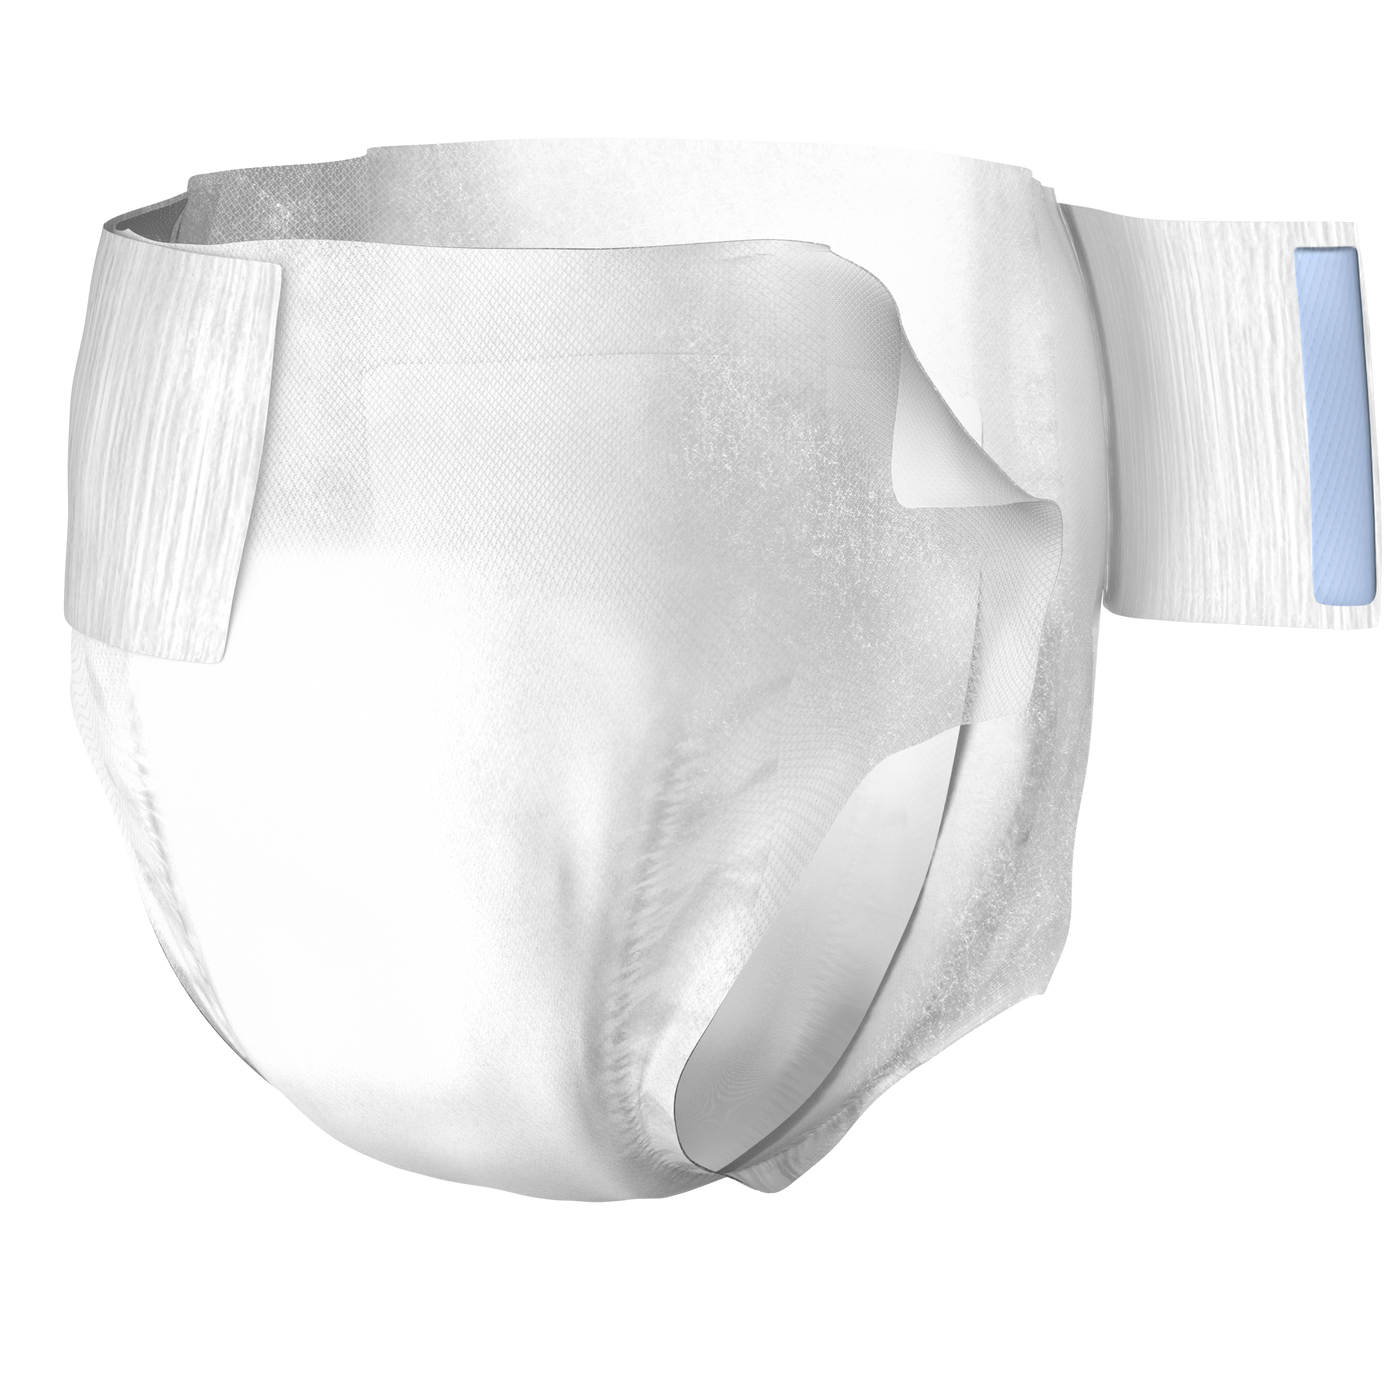 Prevail for Men Protective Underwear - Maximum Absorbency - White